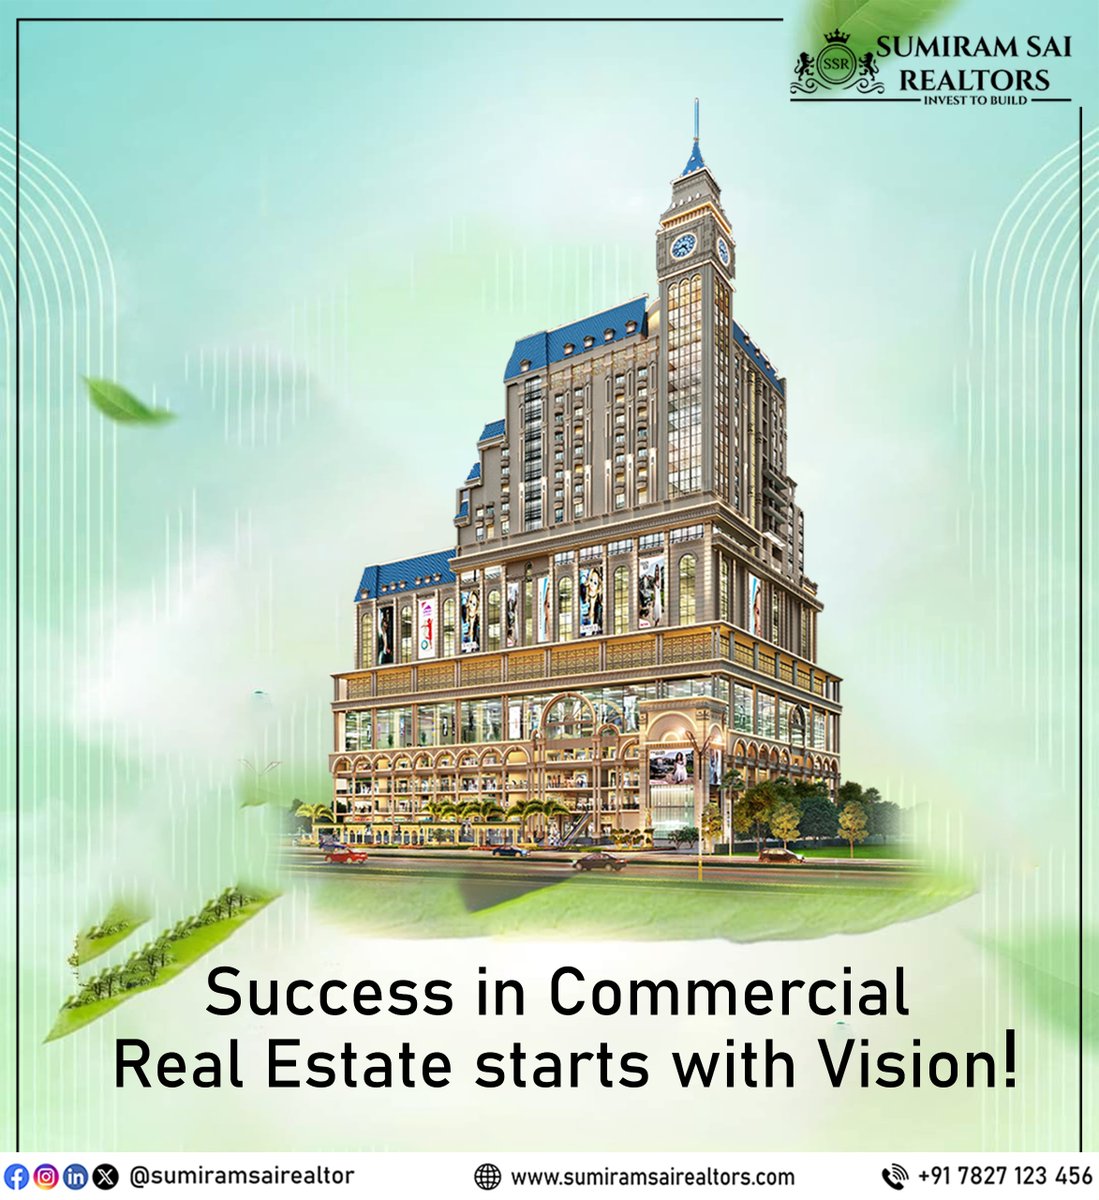 In commercial real estate, vision is the cornerstone of success, shaping possibilities into thriving properties.

#CommercialRealEstateVision #StrategicInvestments #InnovativeDevelopments #SculptingOpportunities #VibrantBusinessLandscapes #VisionaryMindset #AnticipateTrends